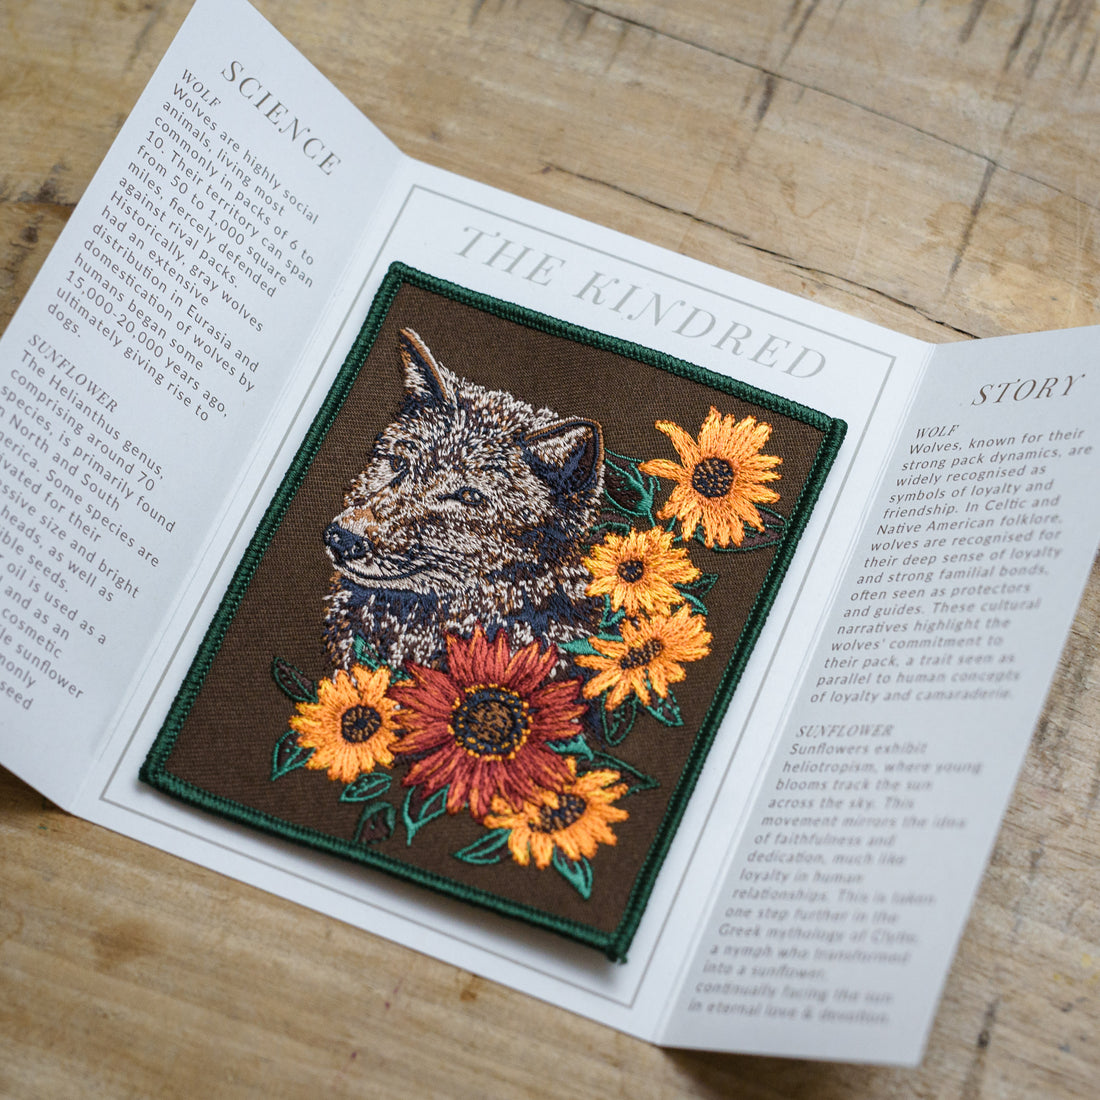 Grey Wolf and Sunflower Embroidered Patch in gatefold card with science and story behind the species